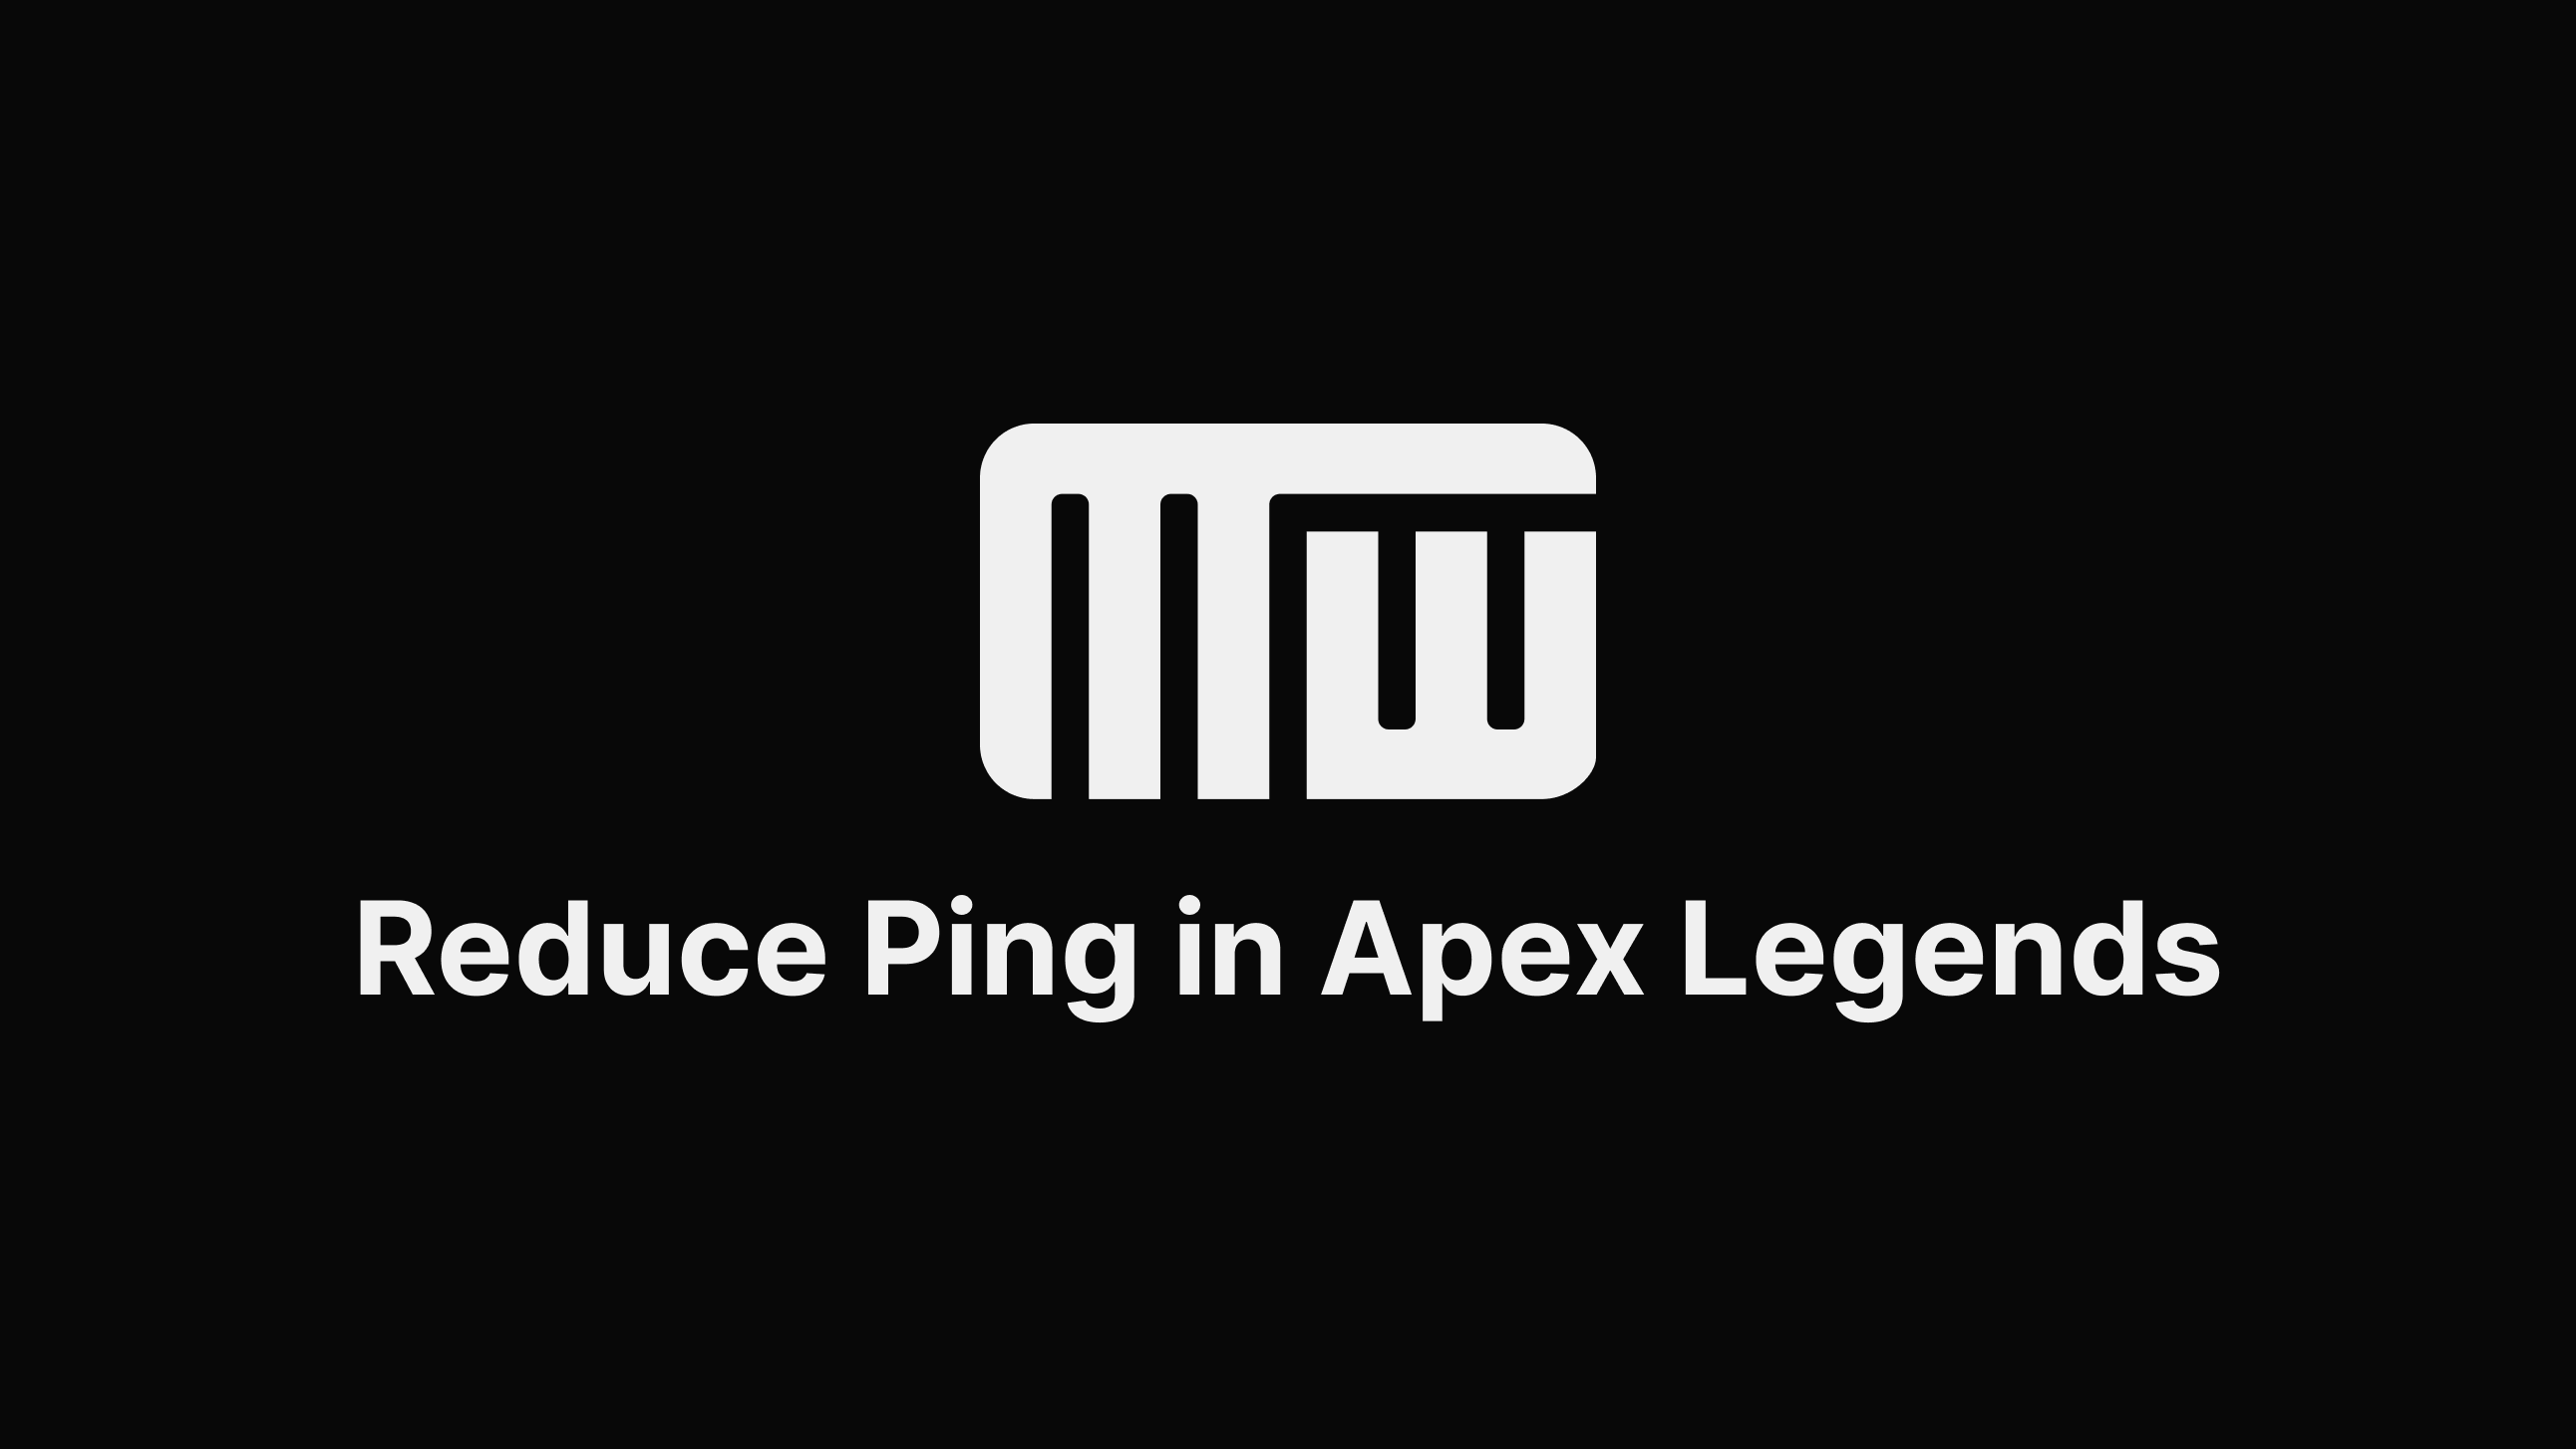 Reduce Ping in Apex Legends